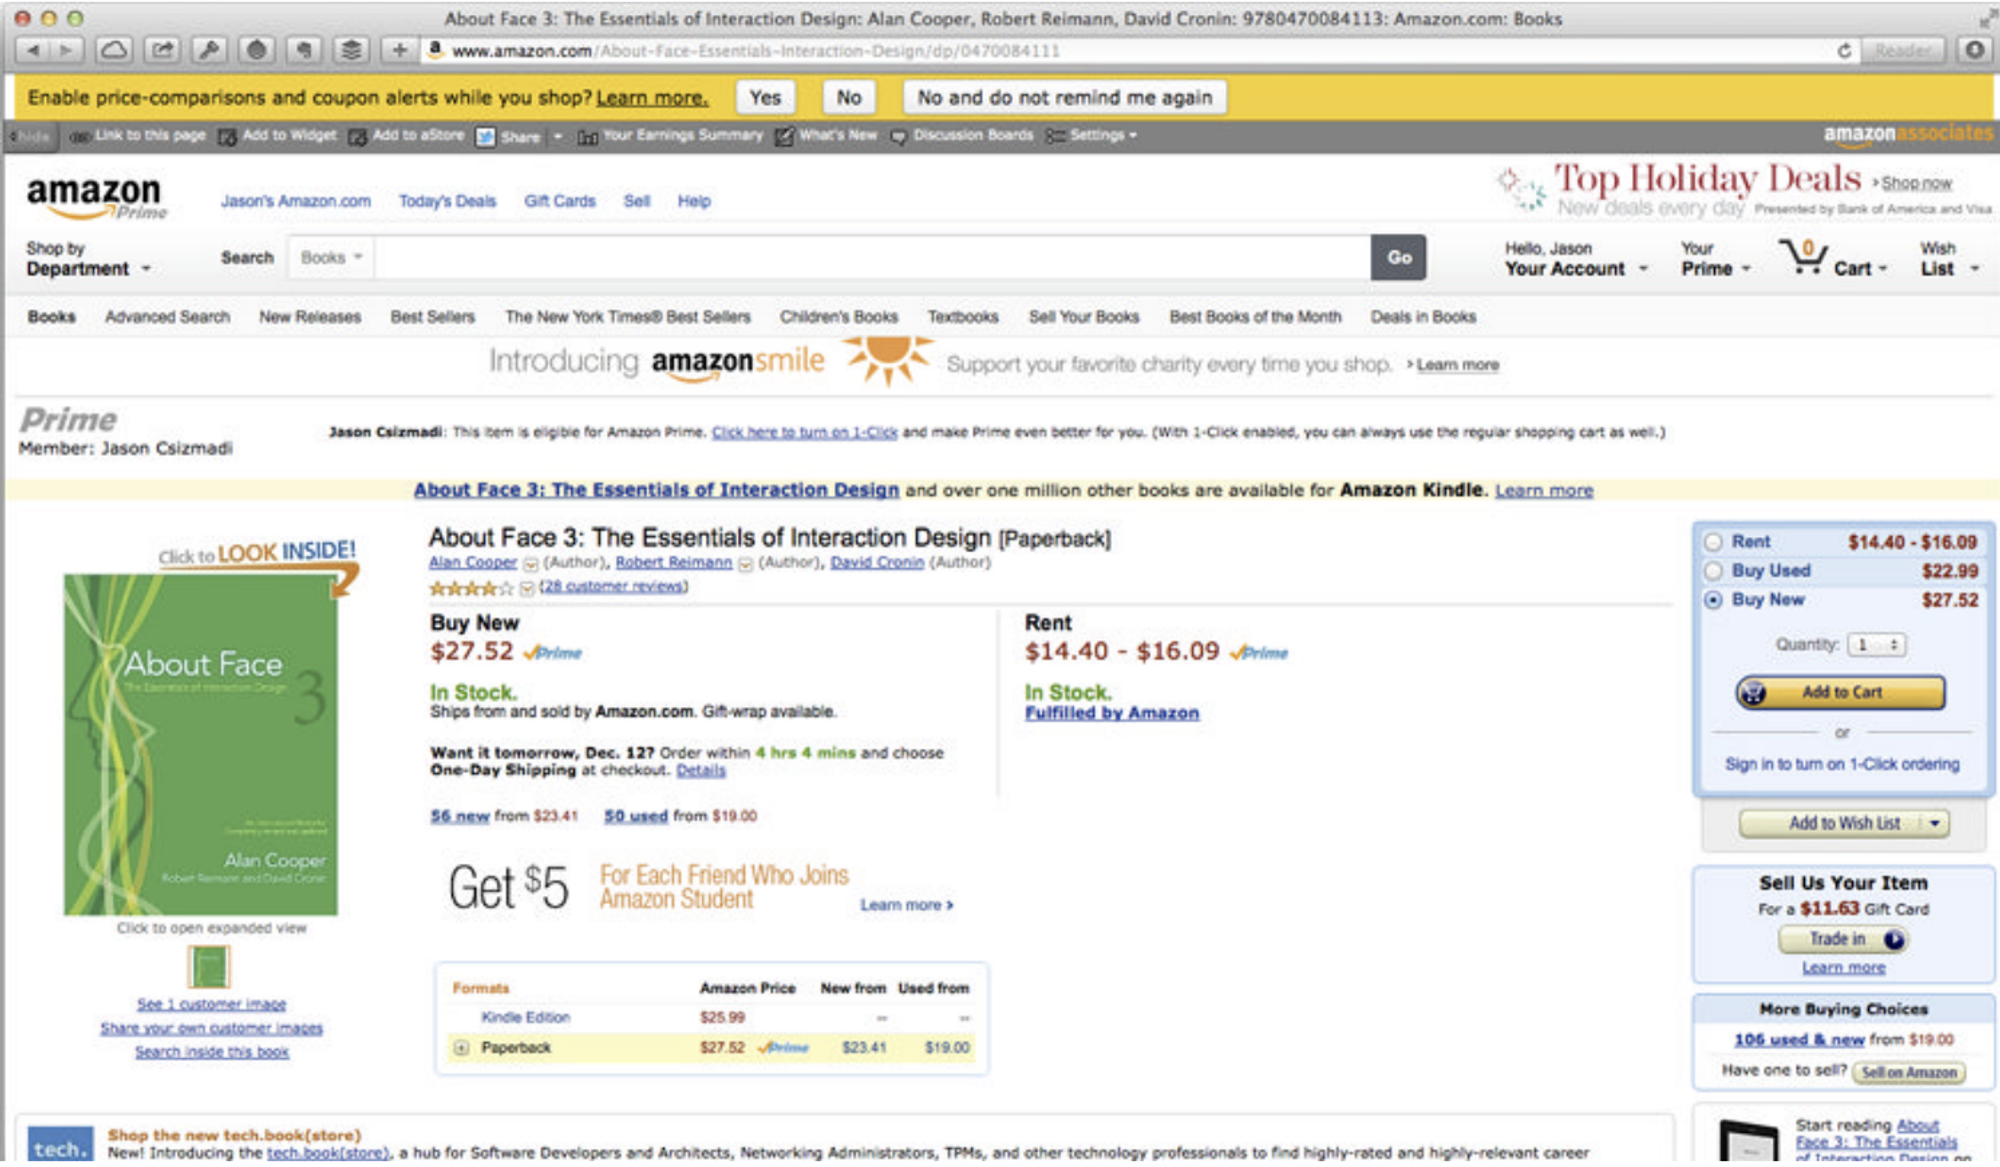 Amazon is a classic example of a transactional websites.